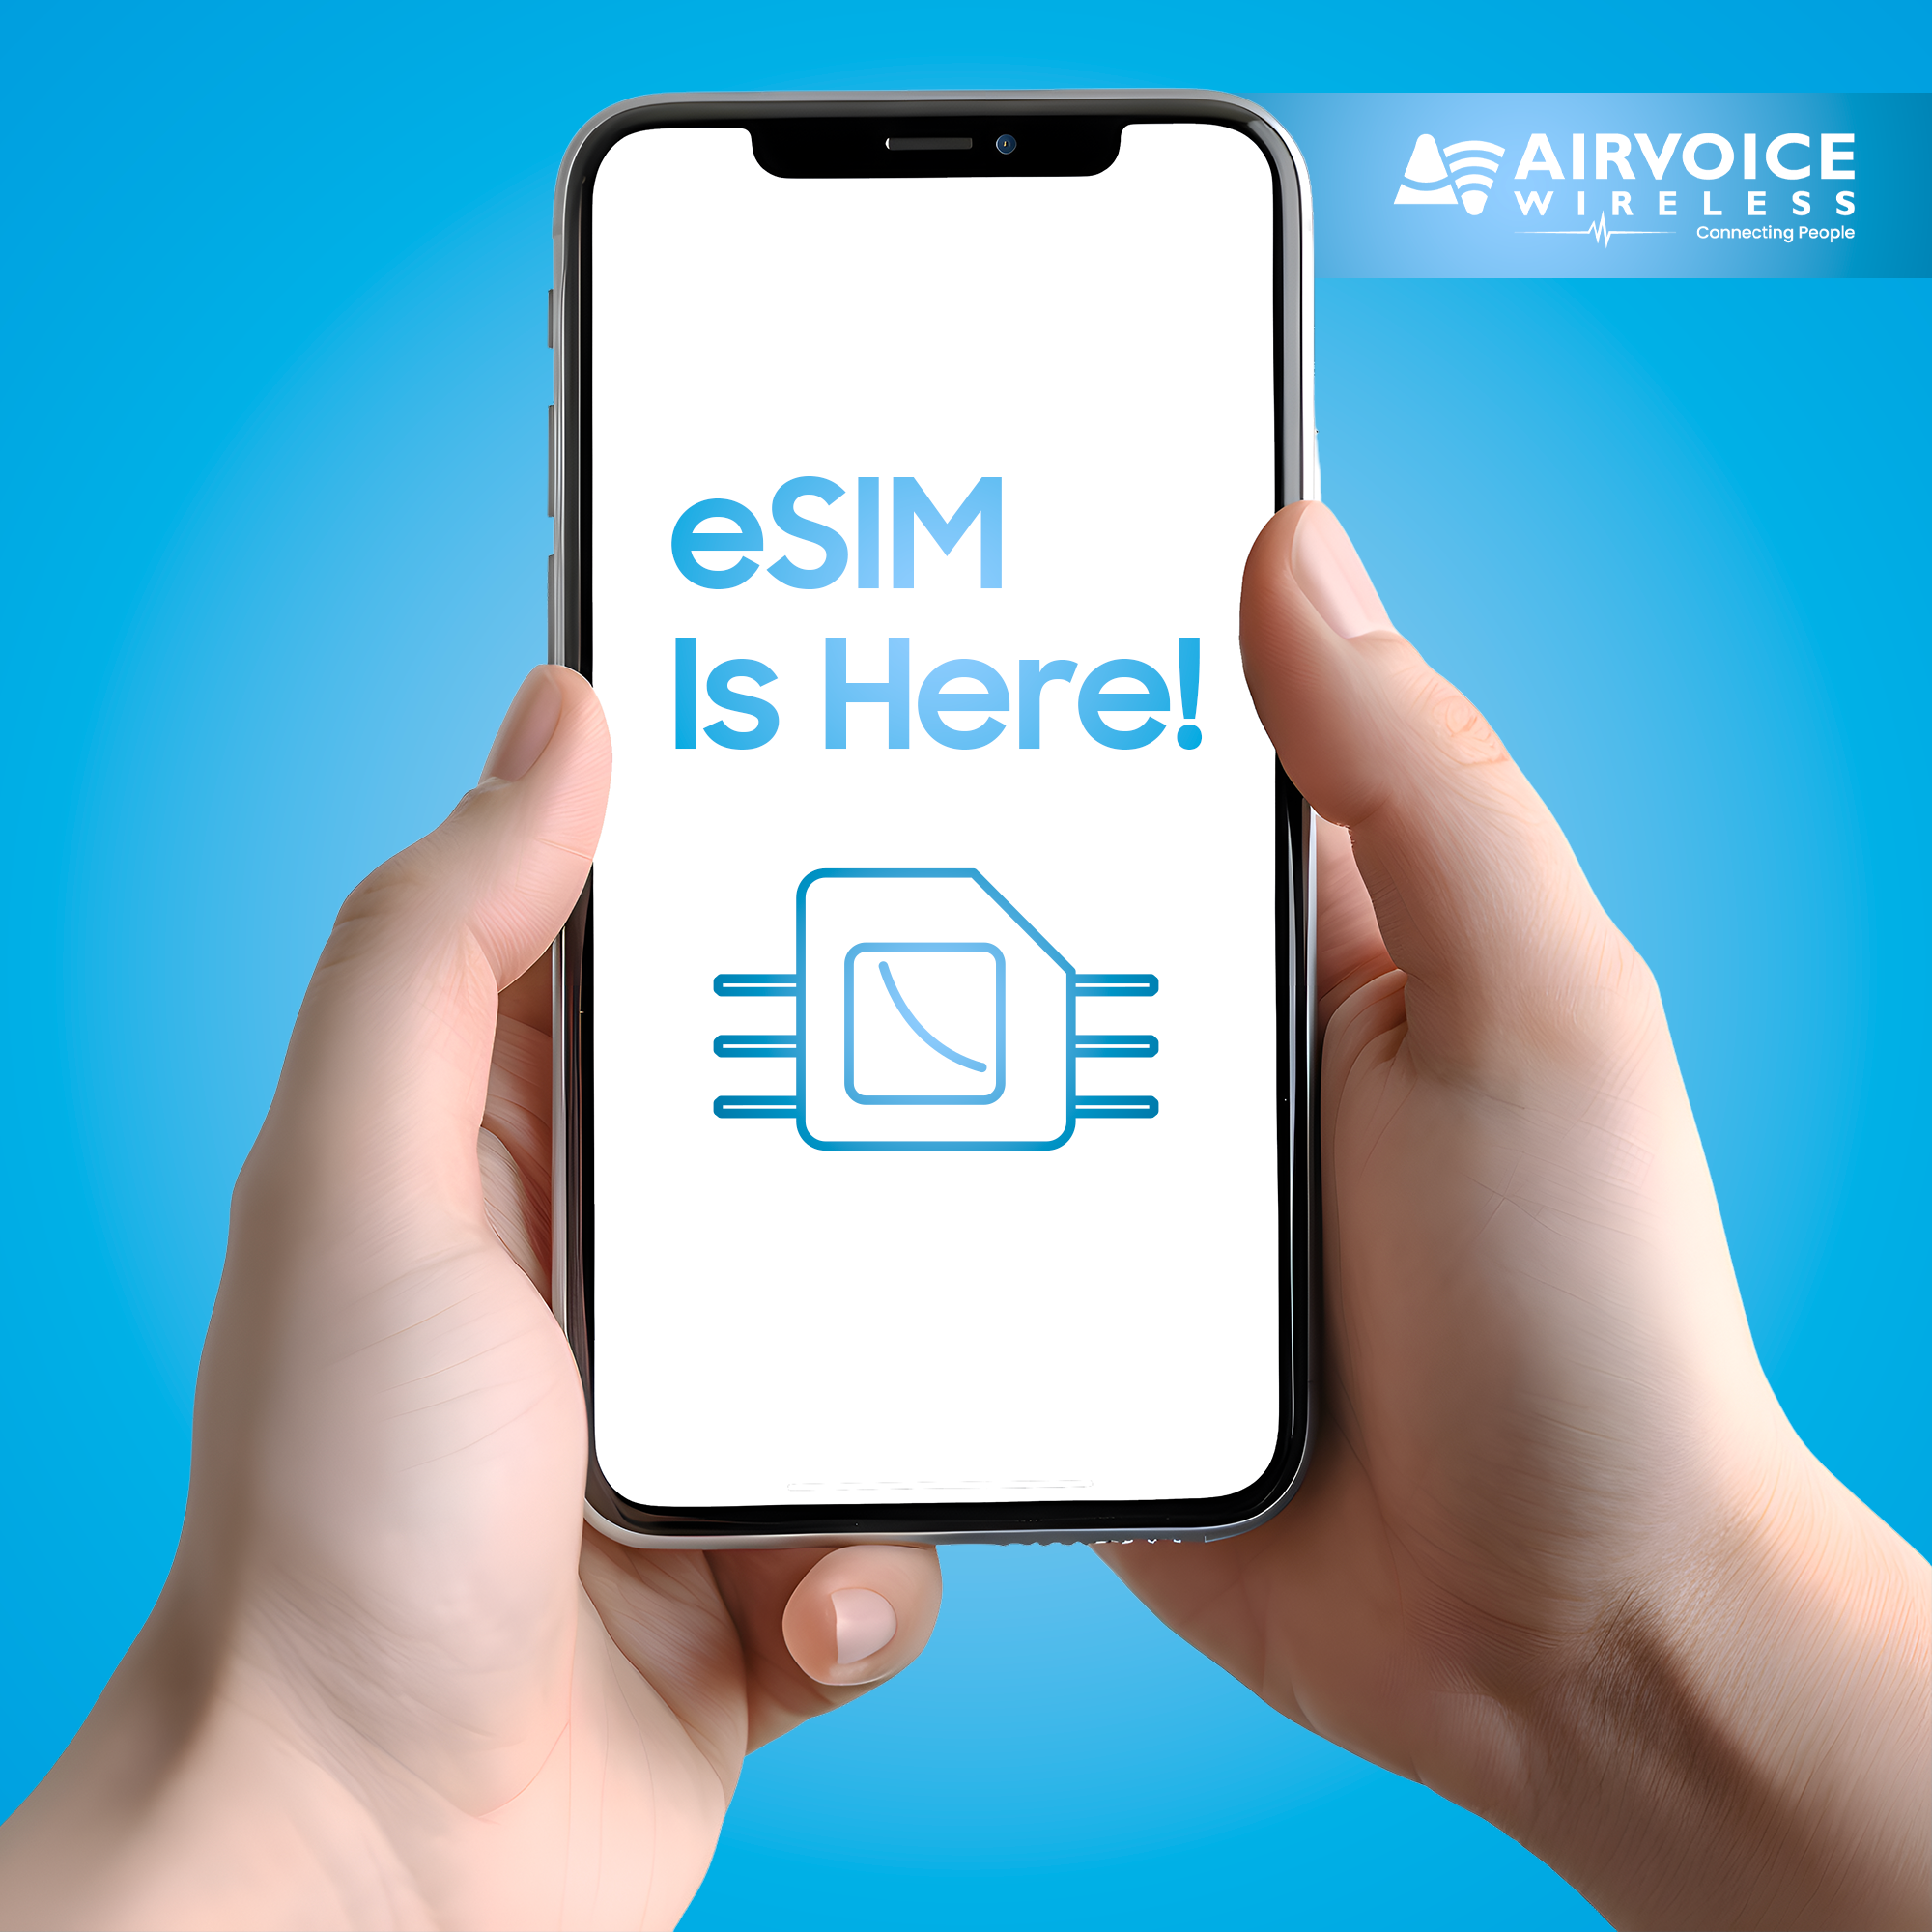 What to Know About Your AirVoice eSIM